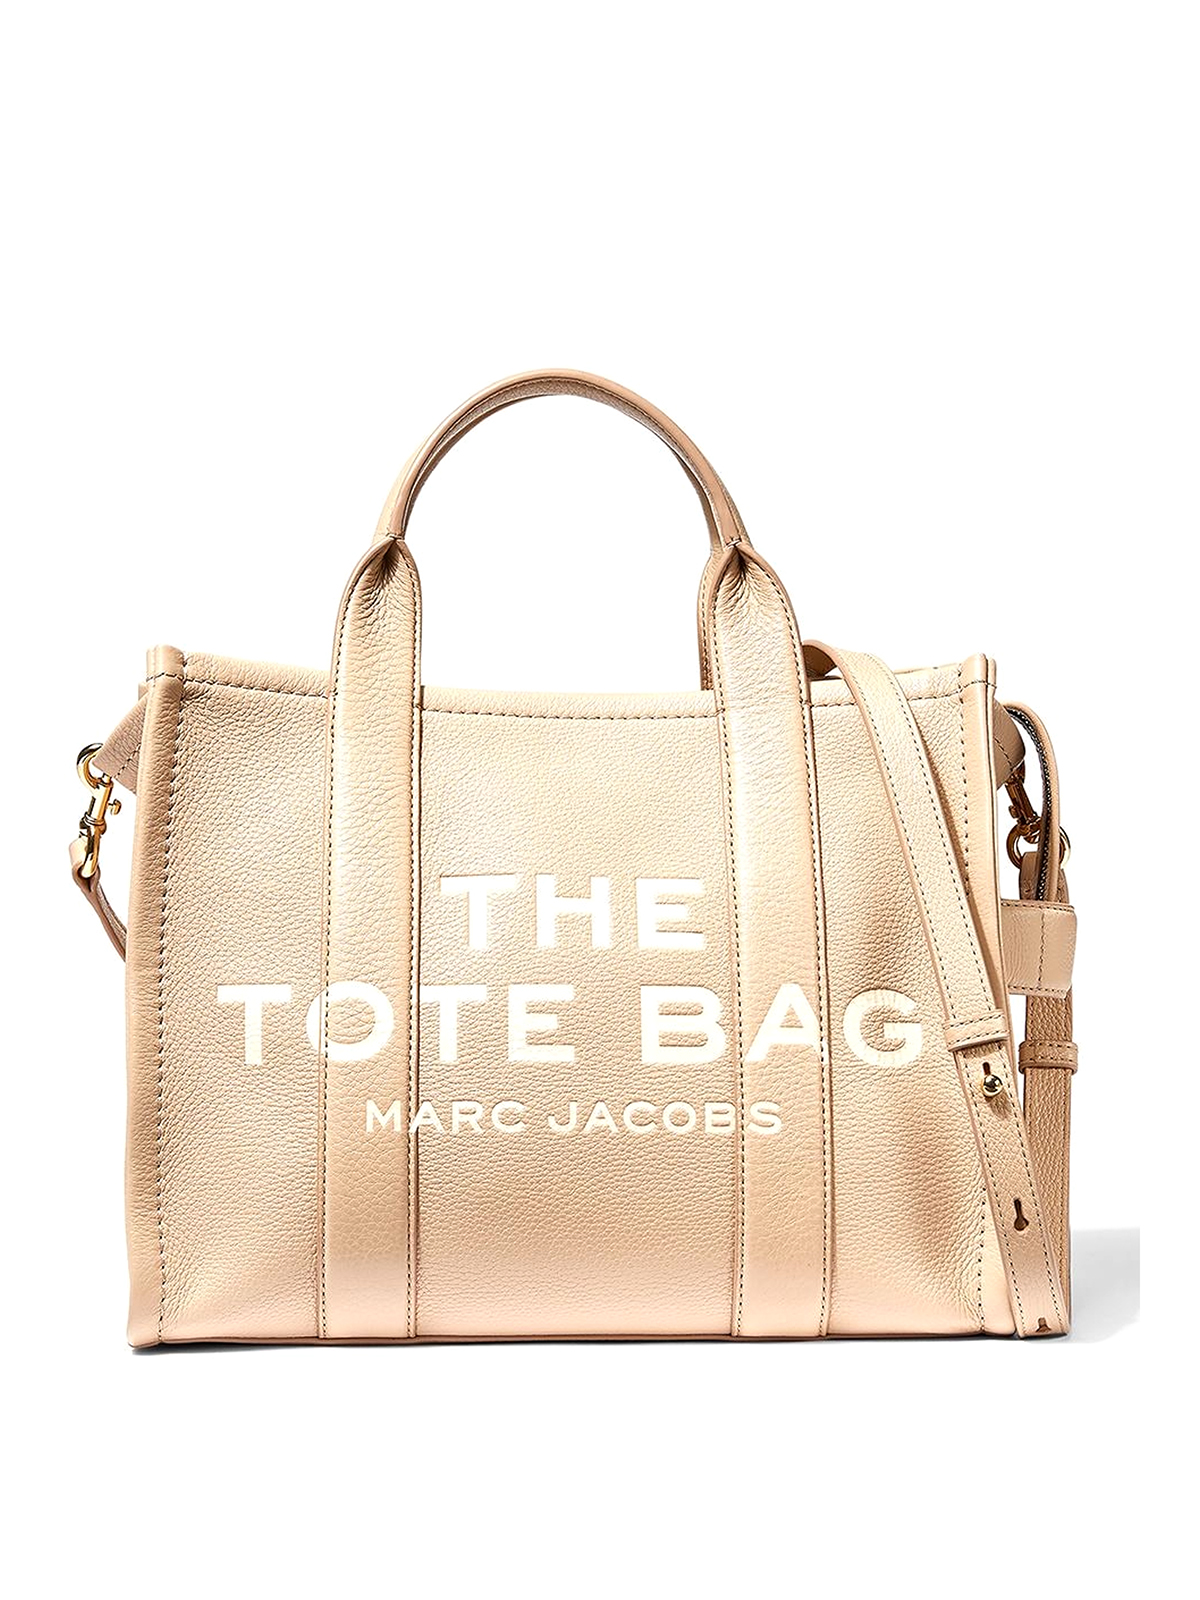 Totes bags Marc Jacobs - The Leather Small Tote Bag - H004L01PF21617